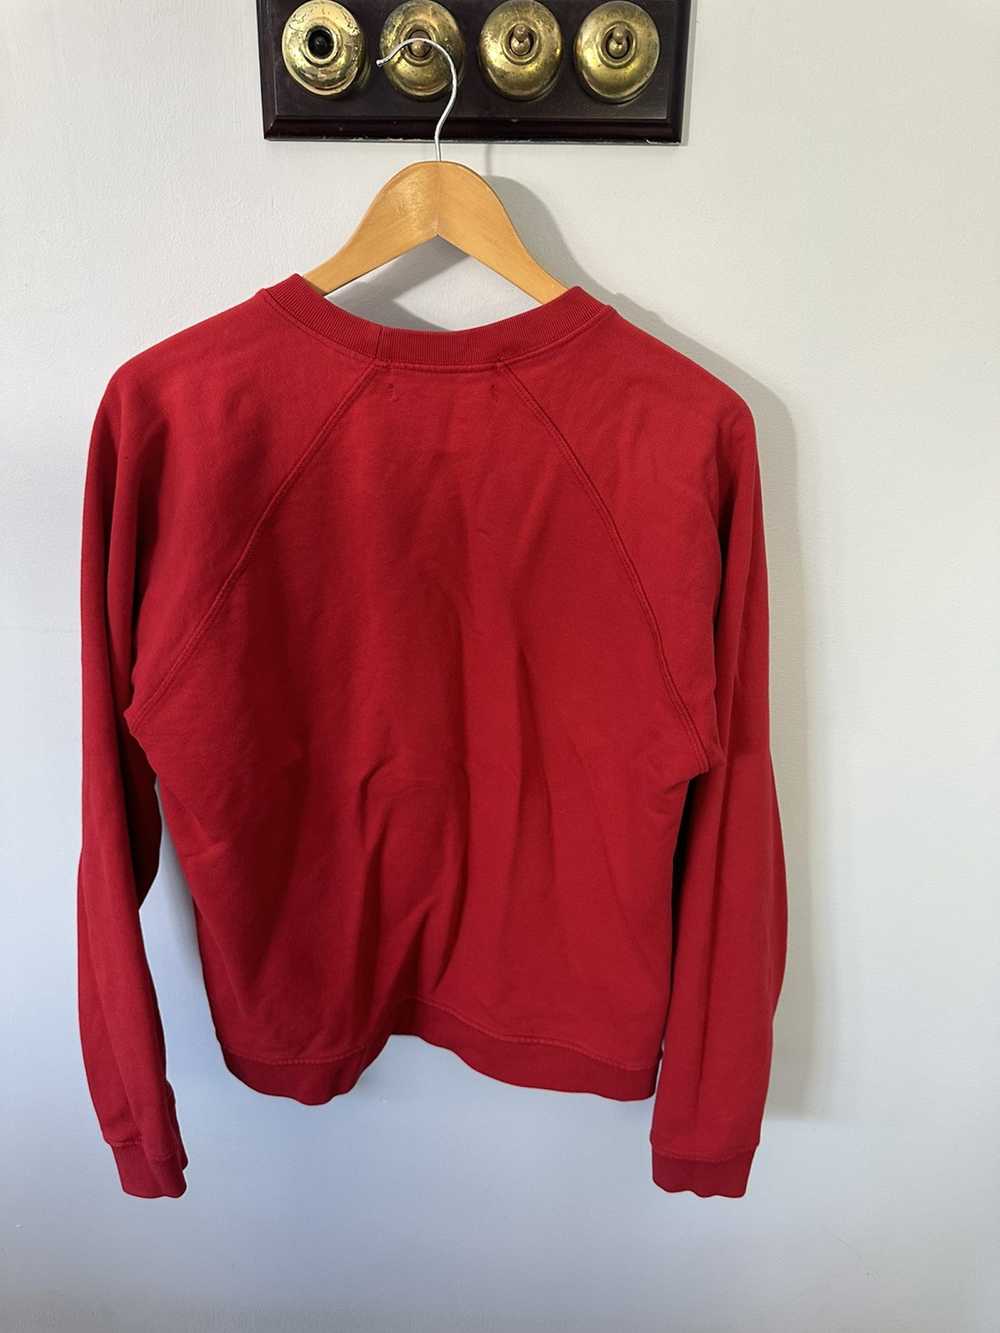 Reese Cooper Bus Stop Sweater - image 3